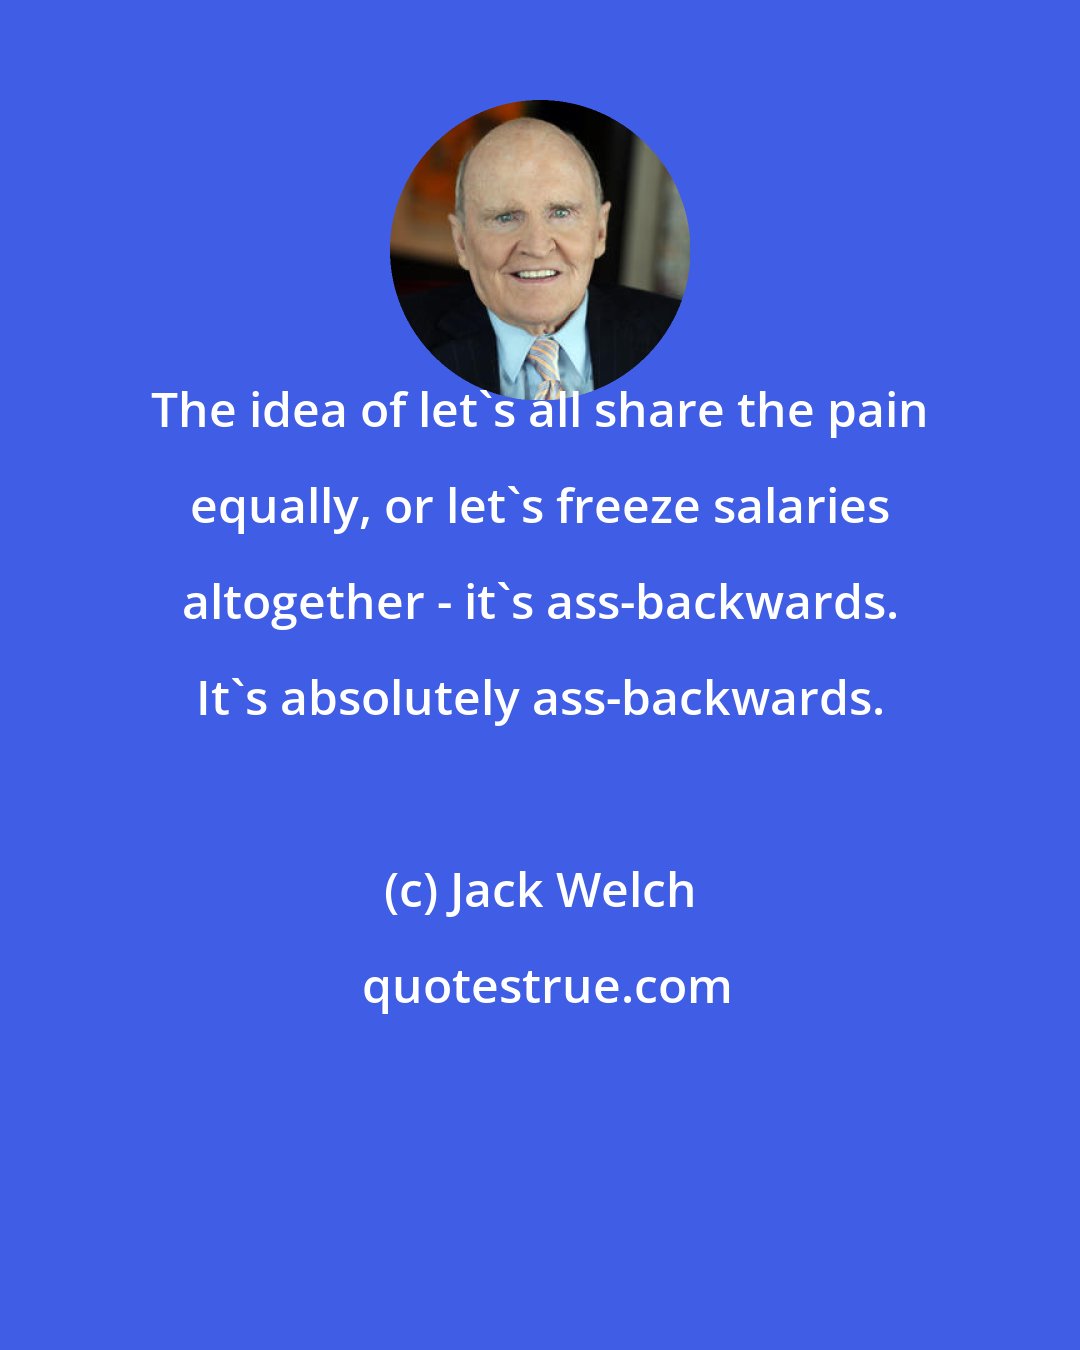 Jack Welch: The idea of let's all share the pain equally, or let's freeze salaries altogether - it's ass-backwards. It's absolutely ass-backwards.